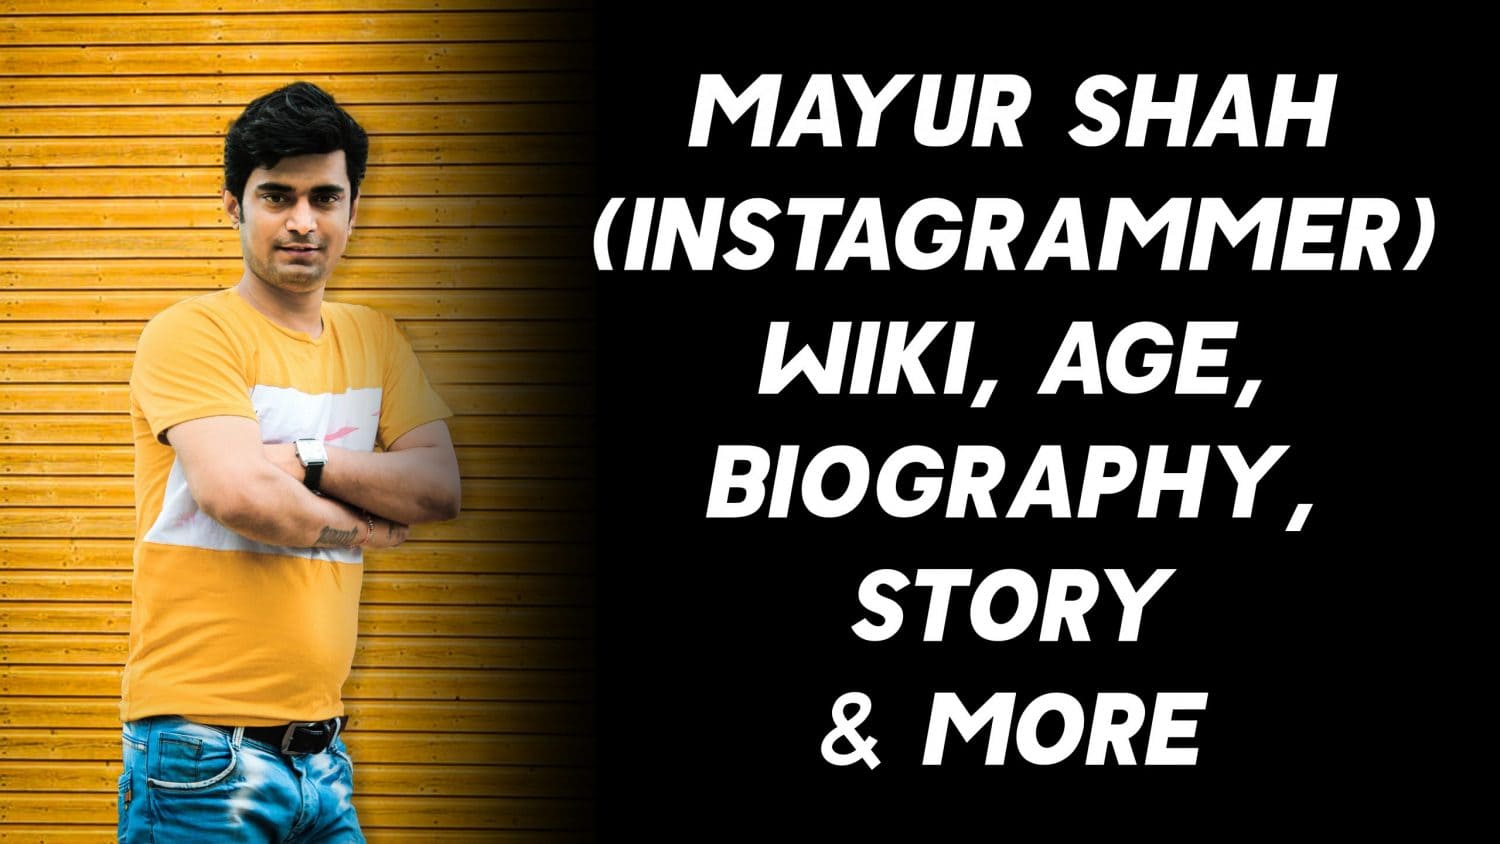 Mayur Shah (Instagrammer) Wiki, Age, Biography, Story & More 1